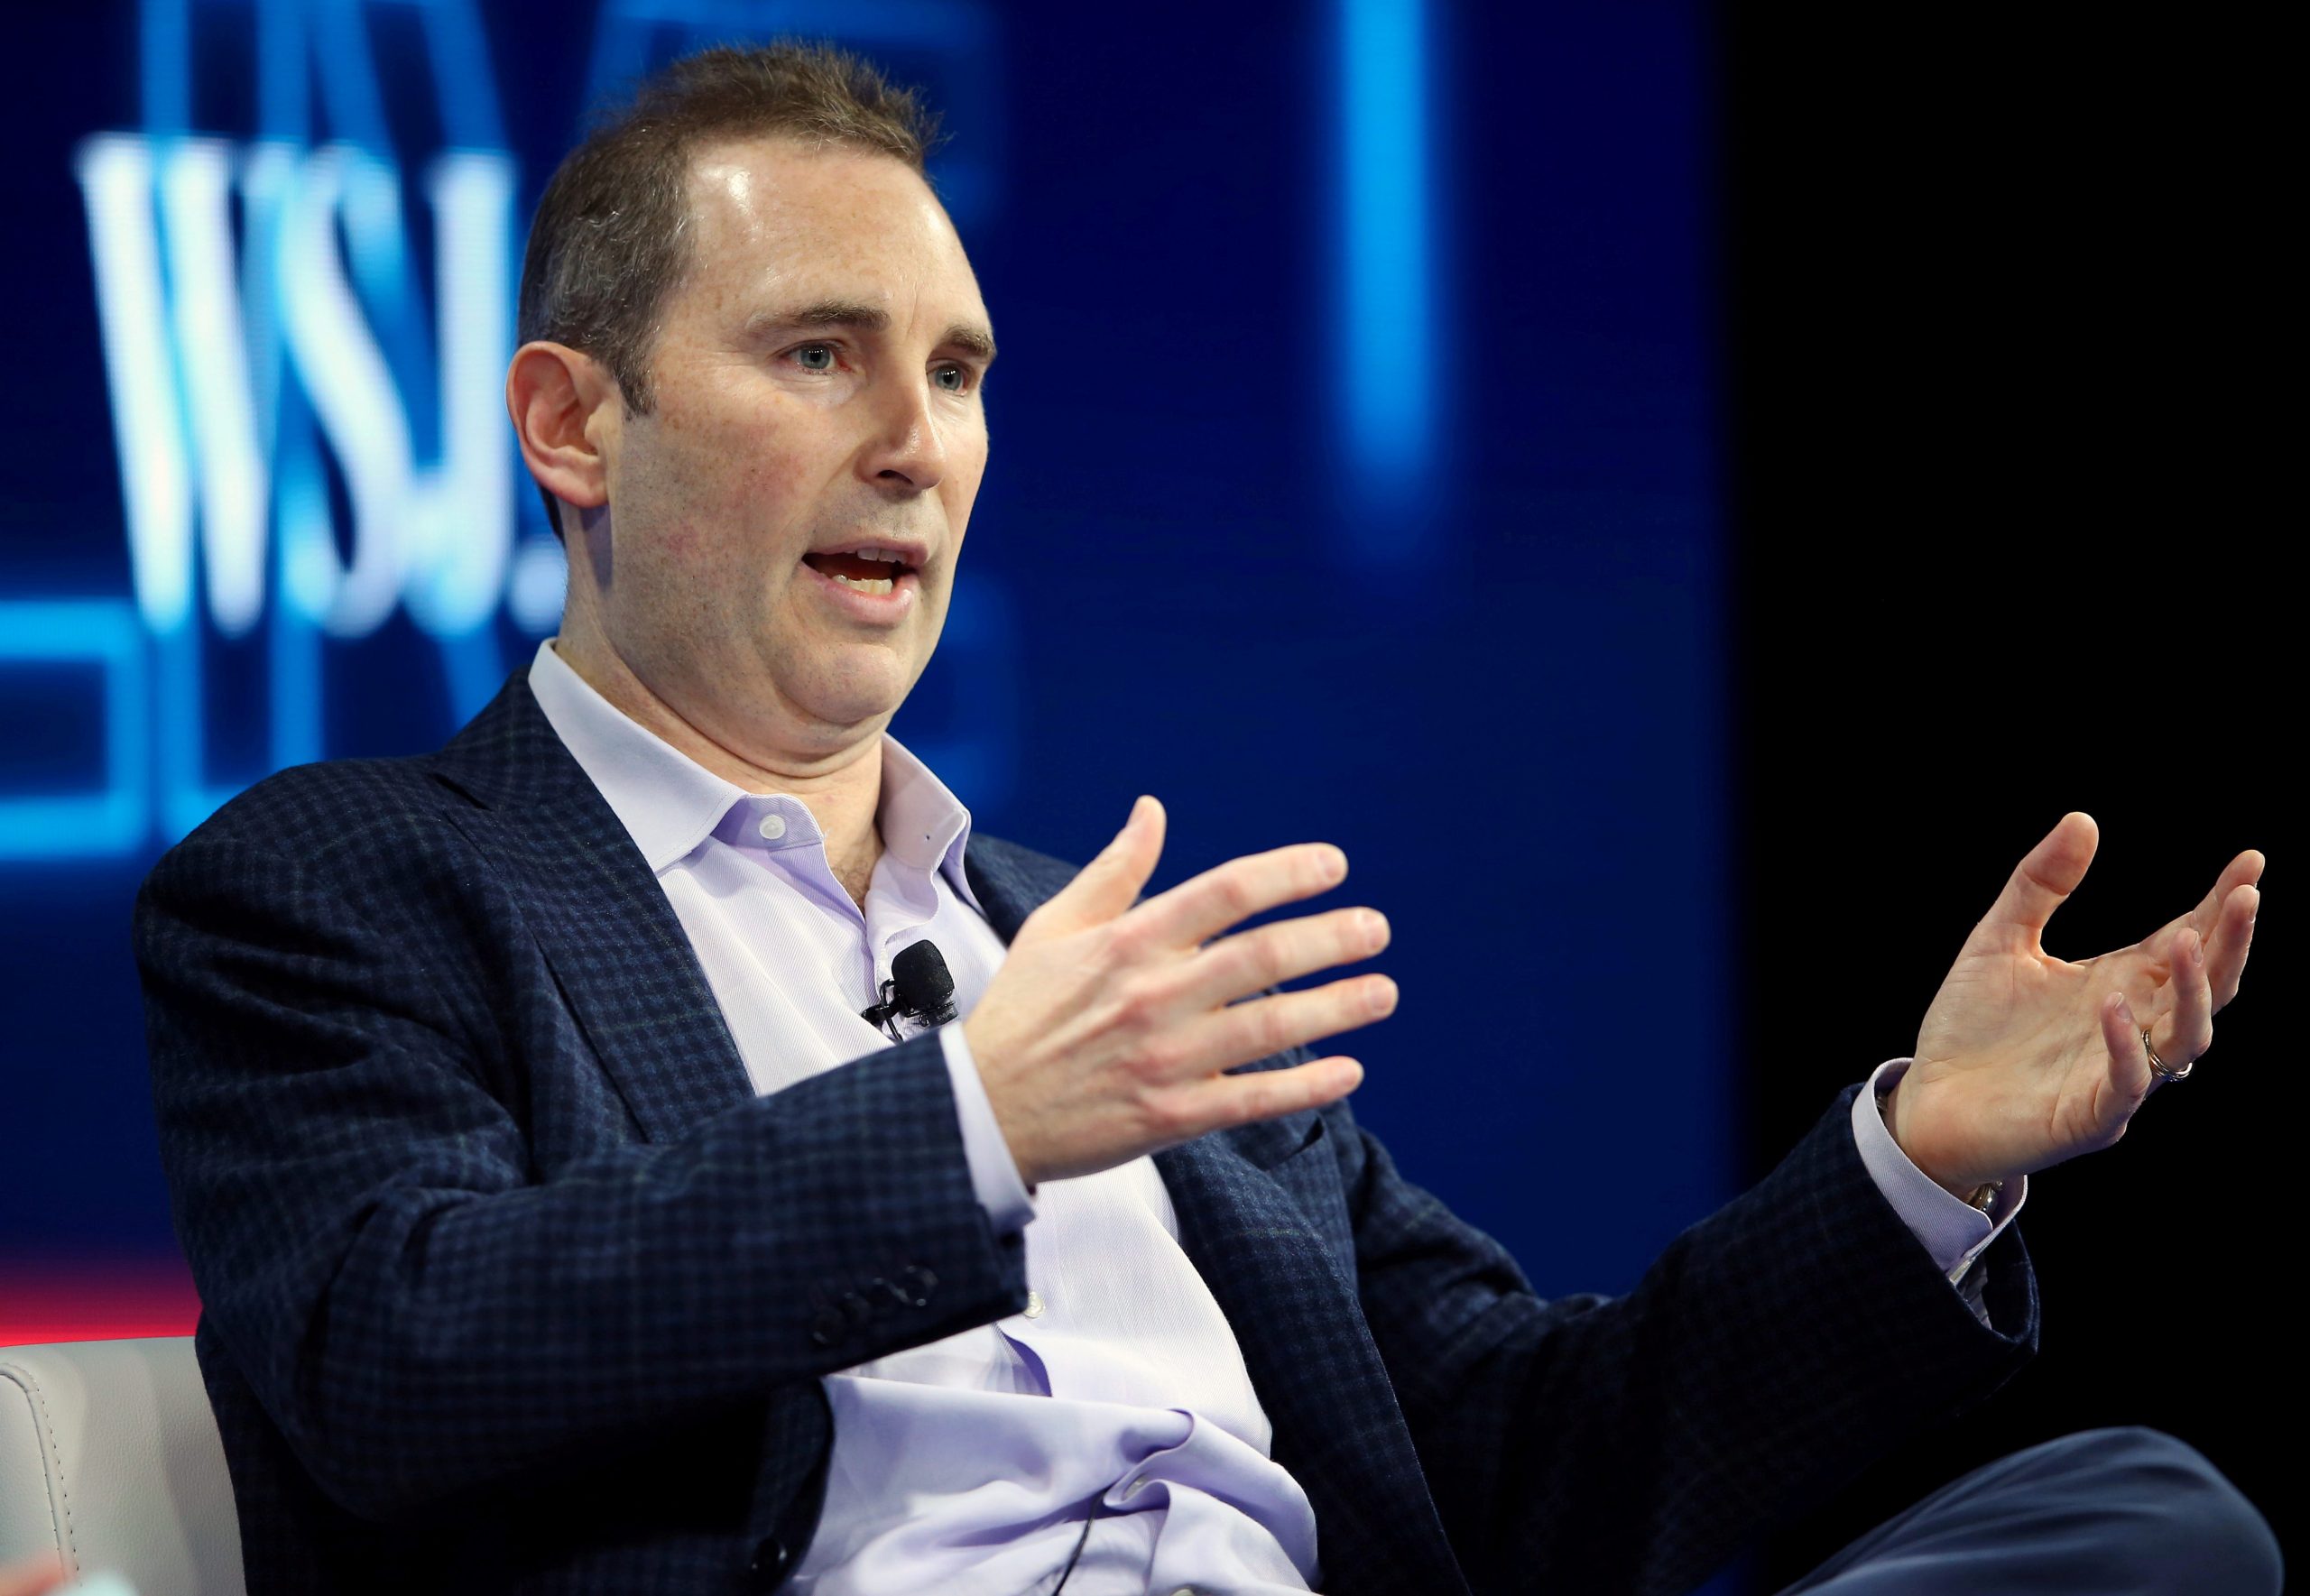 Amazon CEO Andy Jassy motions with his hands on stage at a conference.